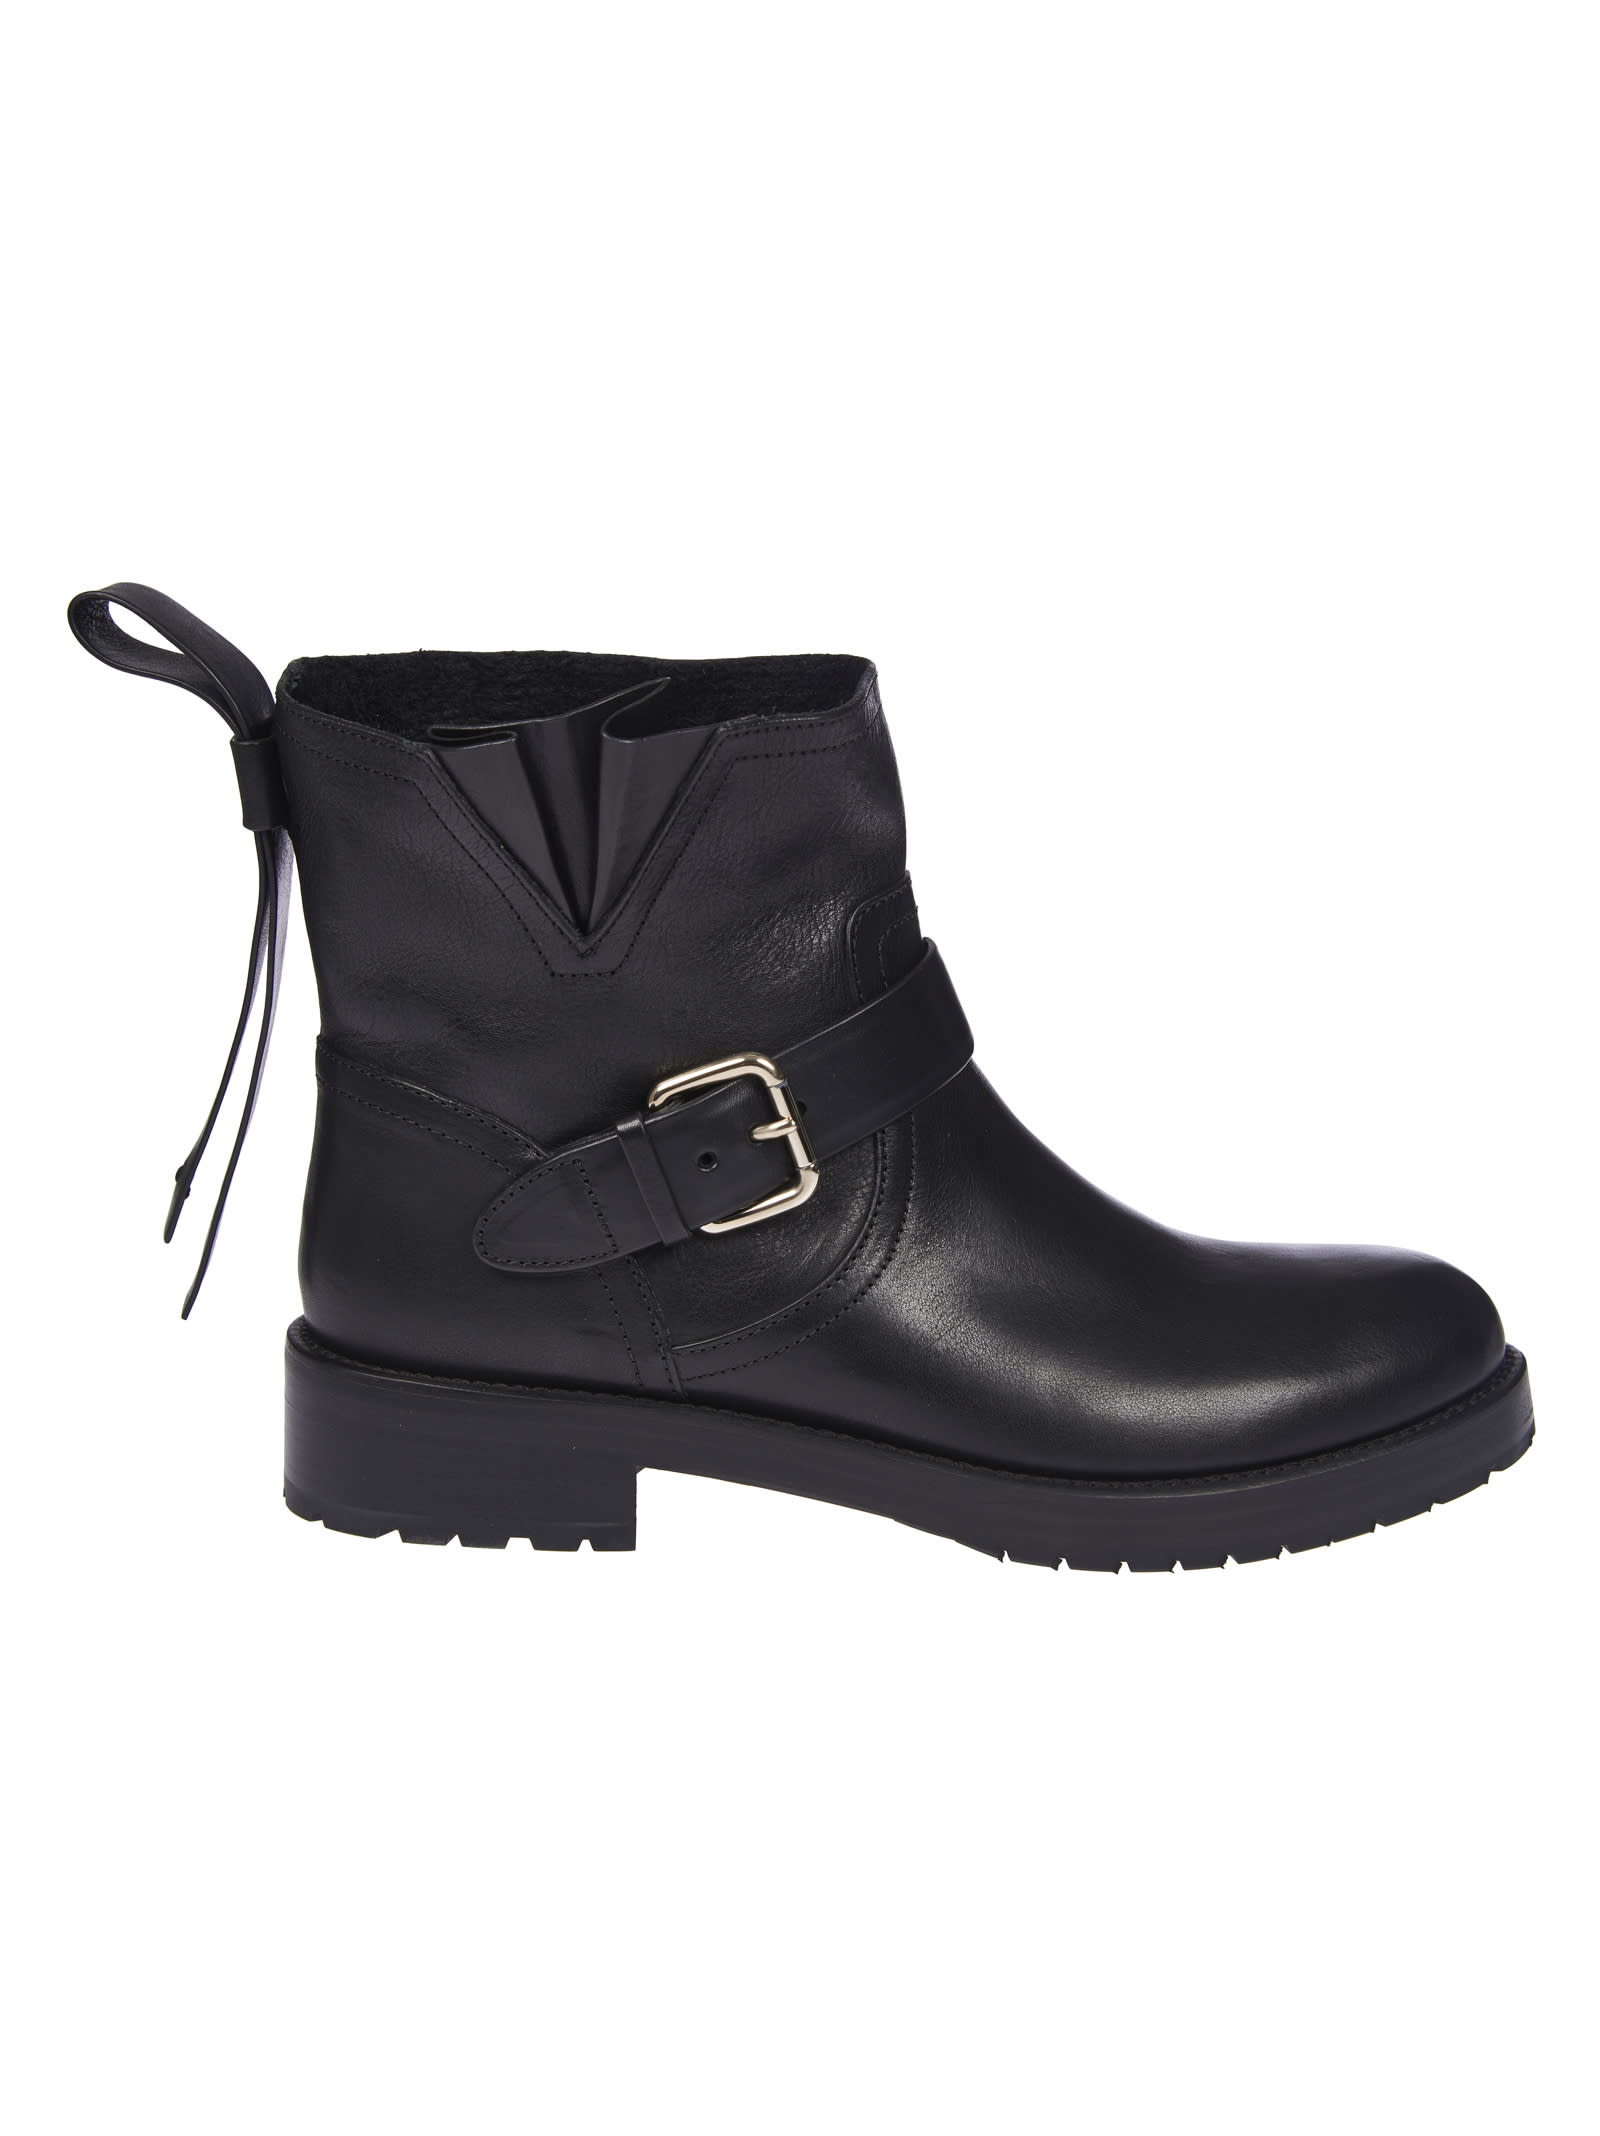 RED Valentino Side Buckled Boots